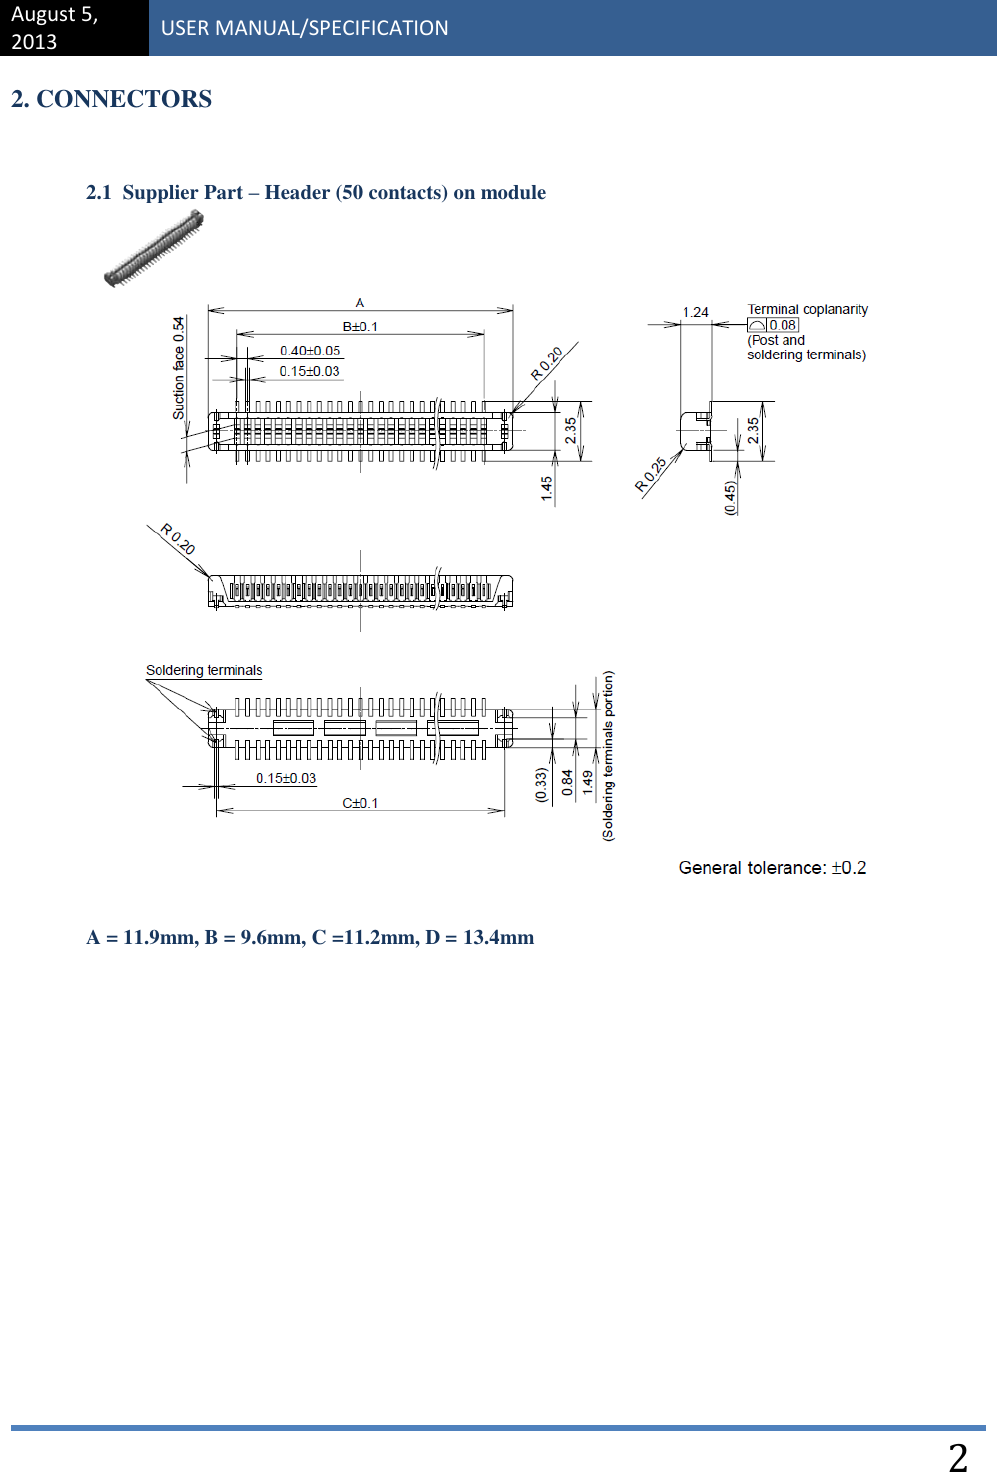 August 5, 2013 USER MANUAL/SPECIFICATION    2 2. CONNECTORS    2.1  Supplier Part – Header (50 contacts) on module  A = 11.9mm, B = 9.6mm, C =11.2mm, D = 13.4mm           